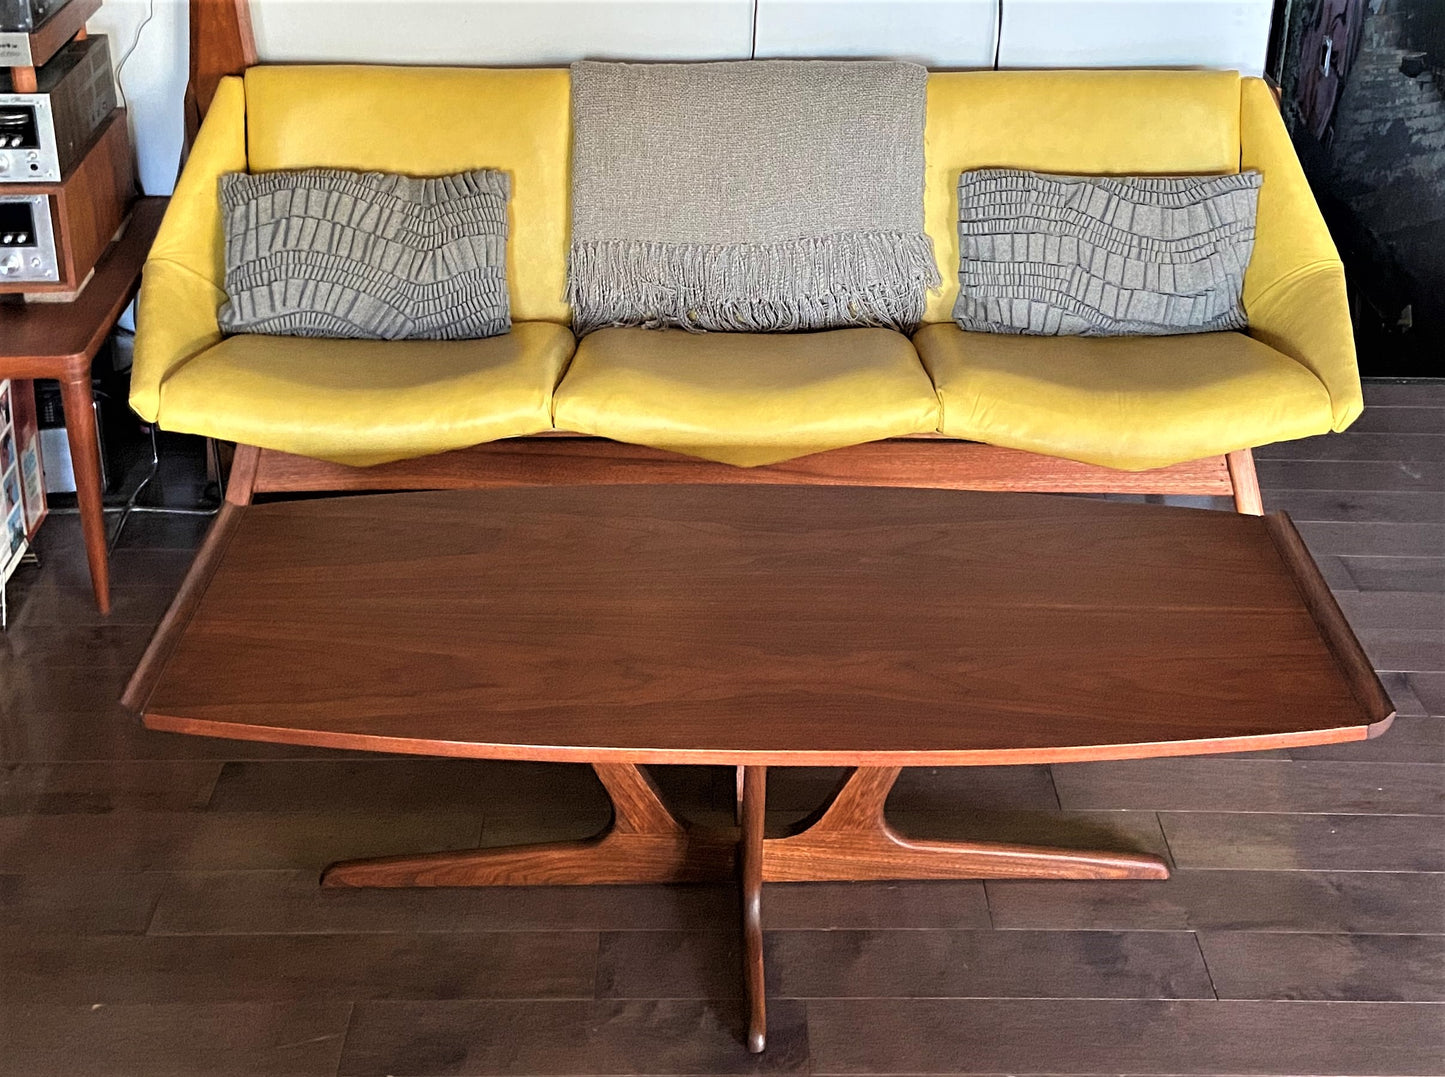 REFINISHED MCM Walnut Surfboard Coffee Table by Deilcraft 54", PERFECT